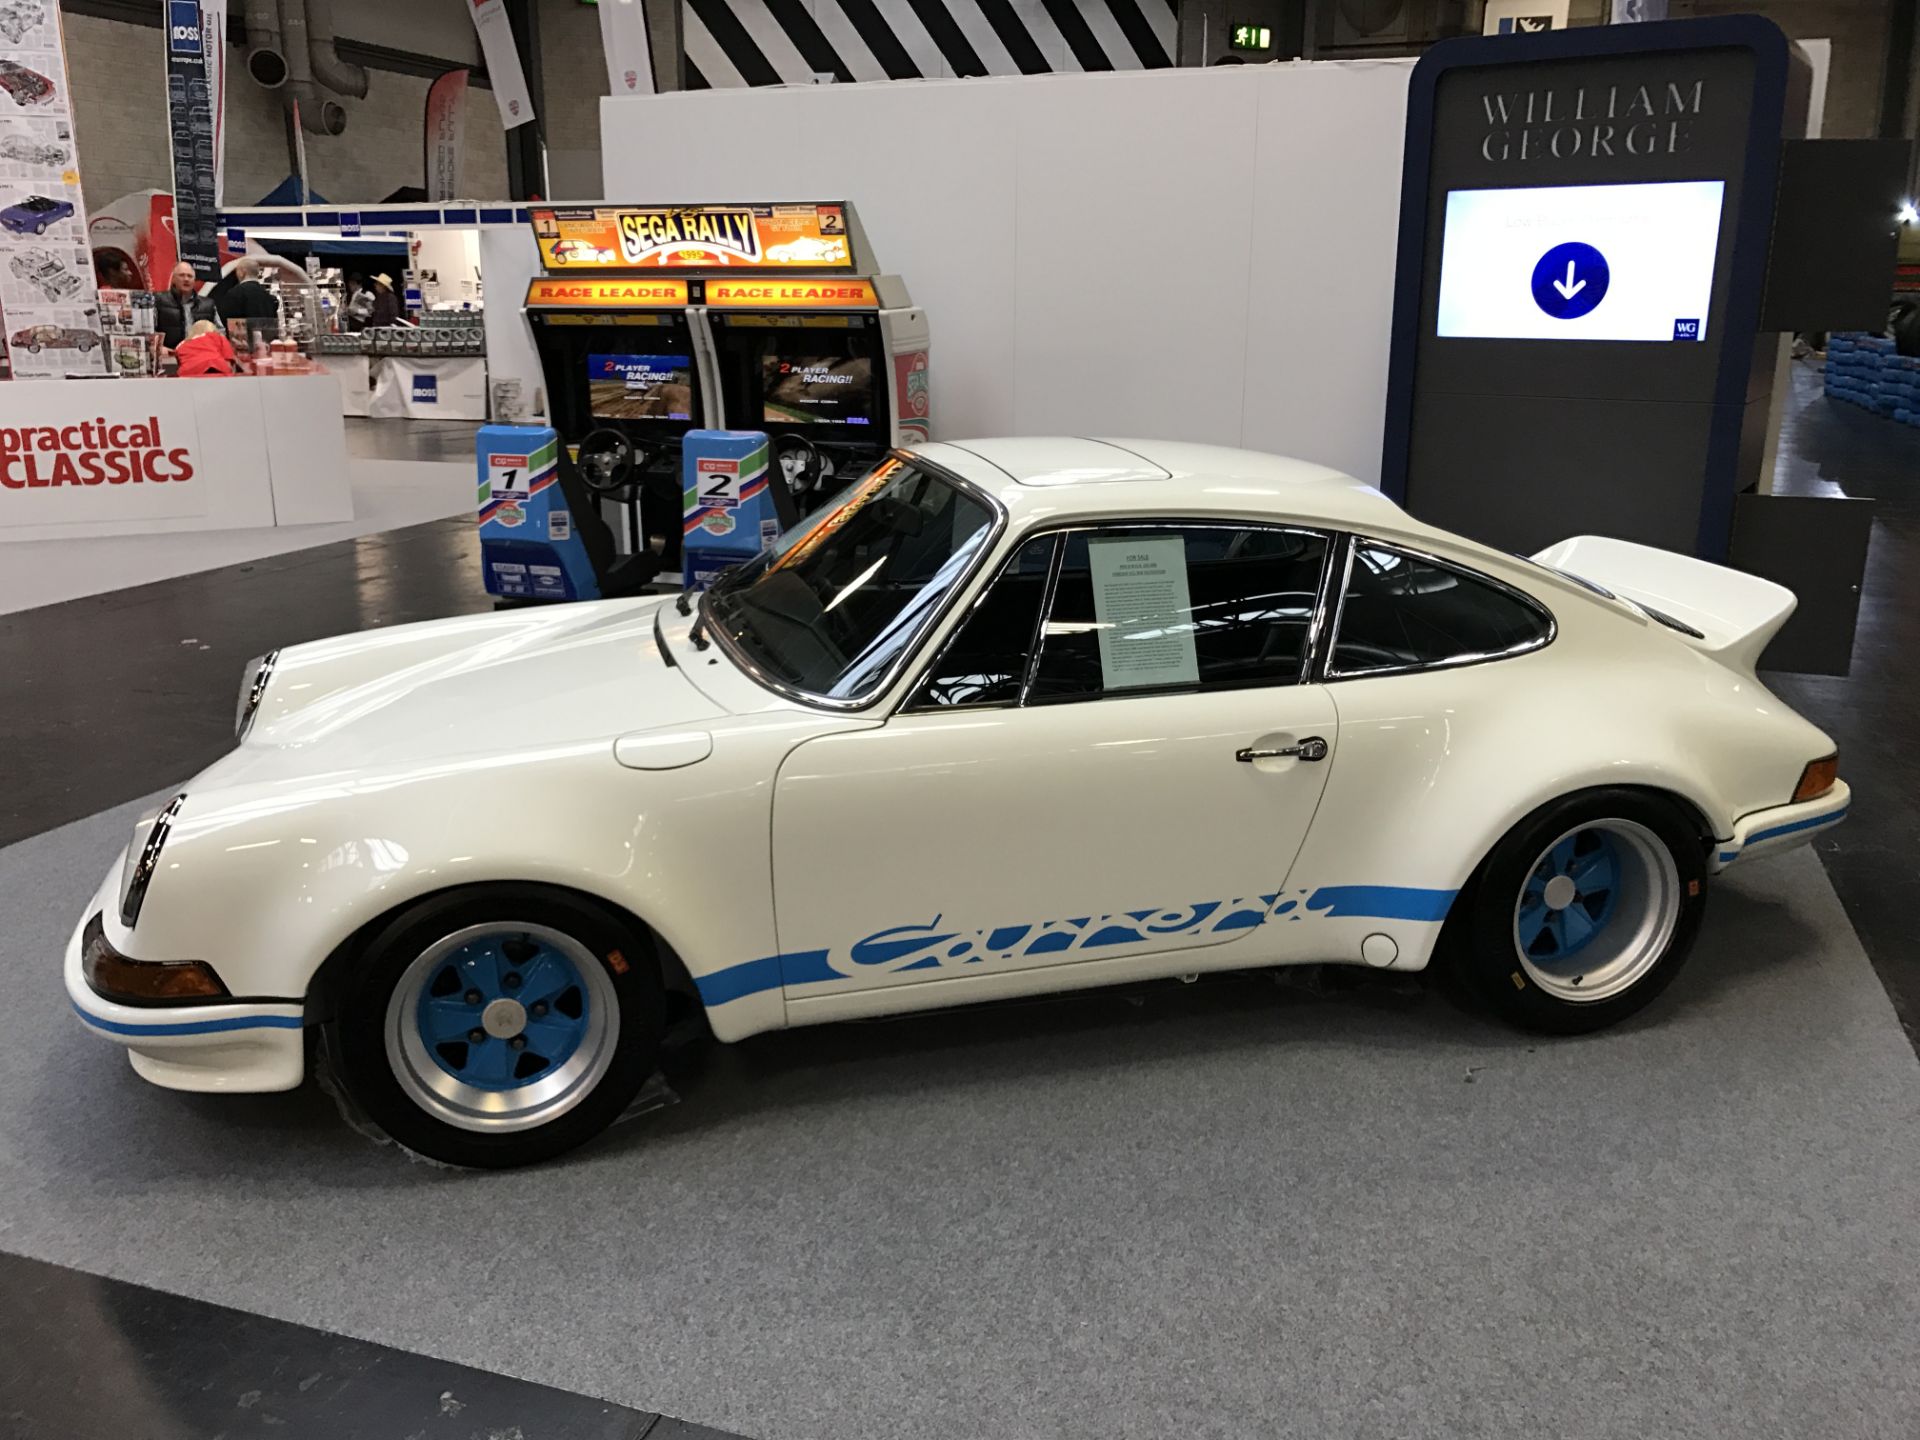 Porsche 911 Carrera 2.7 Rs Recreation - Pro 9 Build Based On A 1986 Porsche 911 **Reserve reduced** - Image 2 of 21